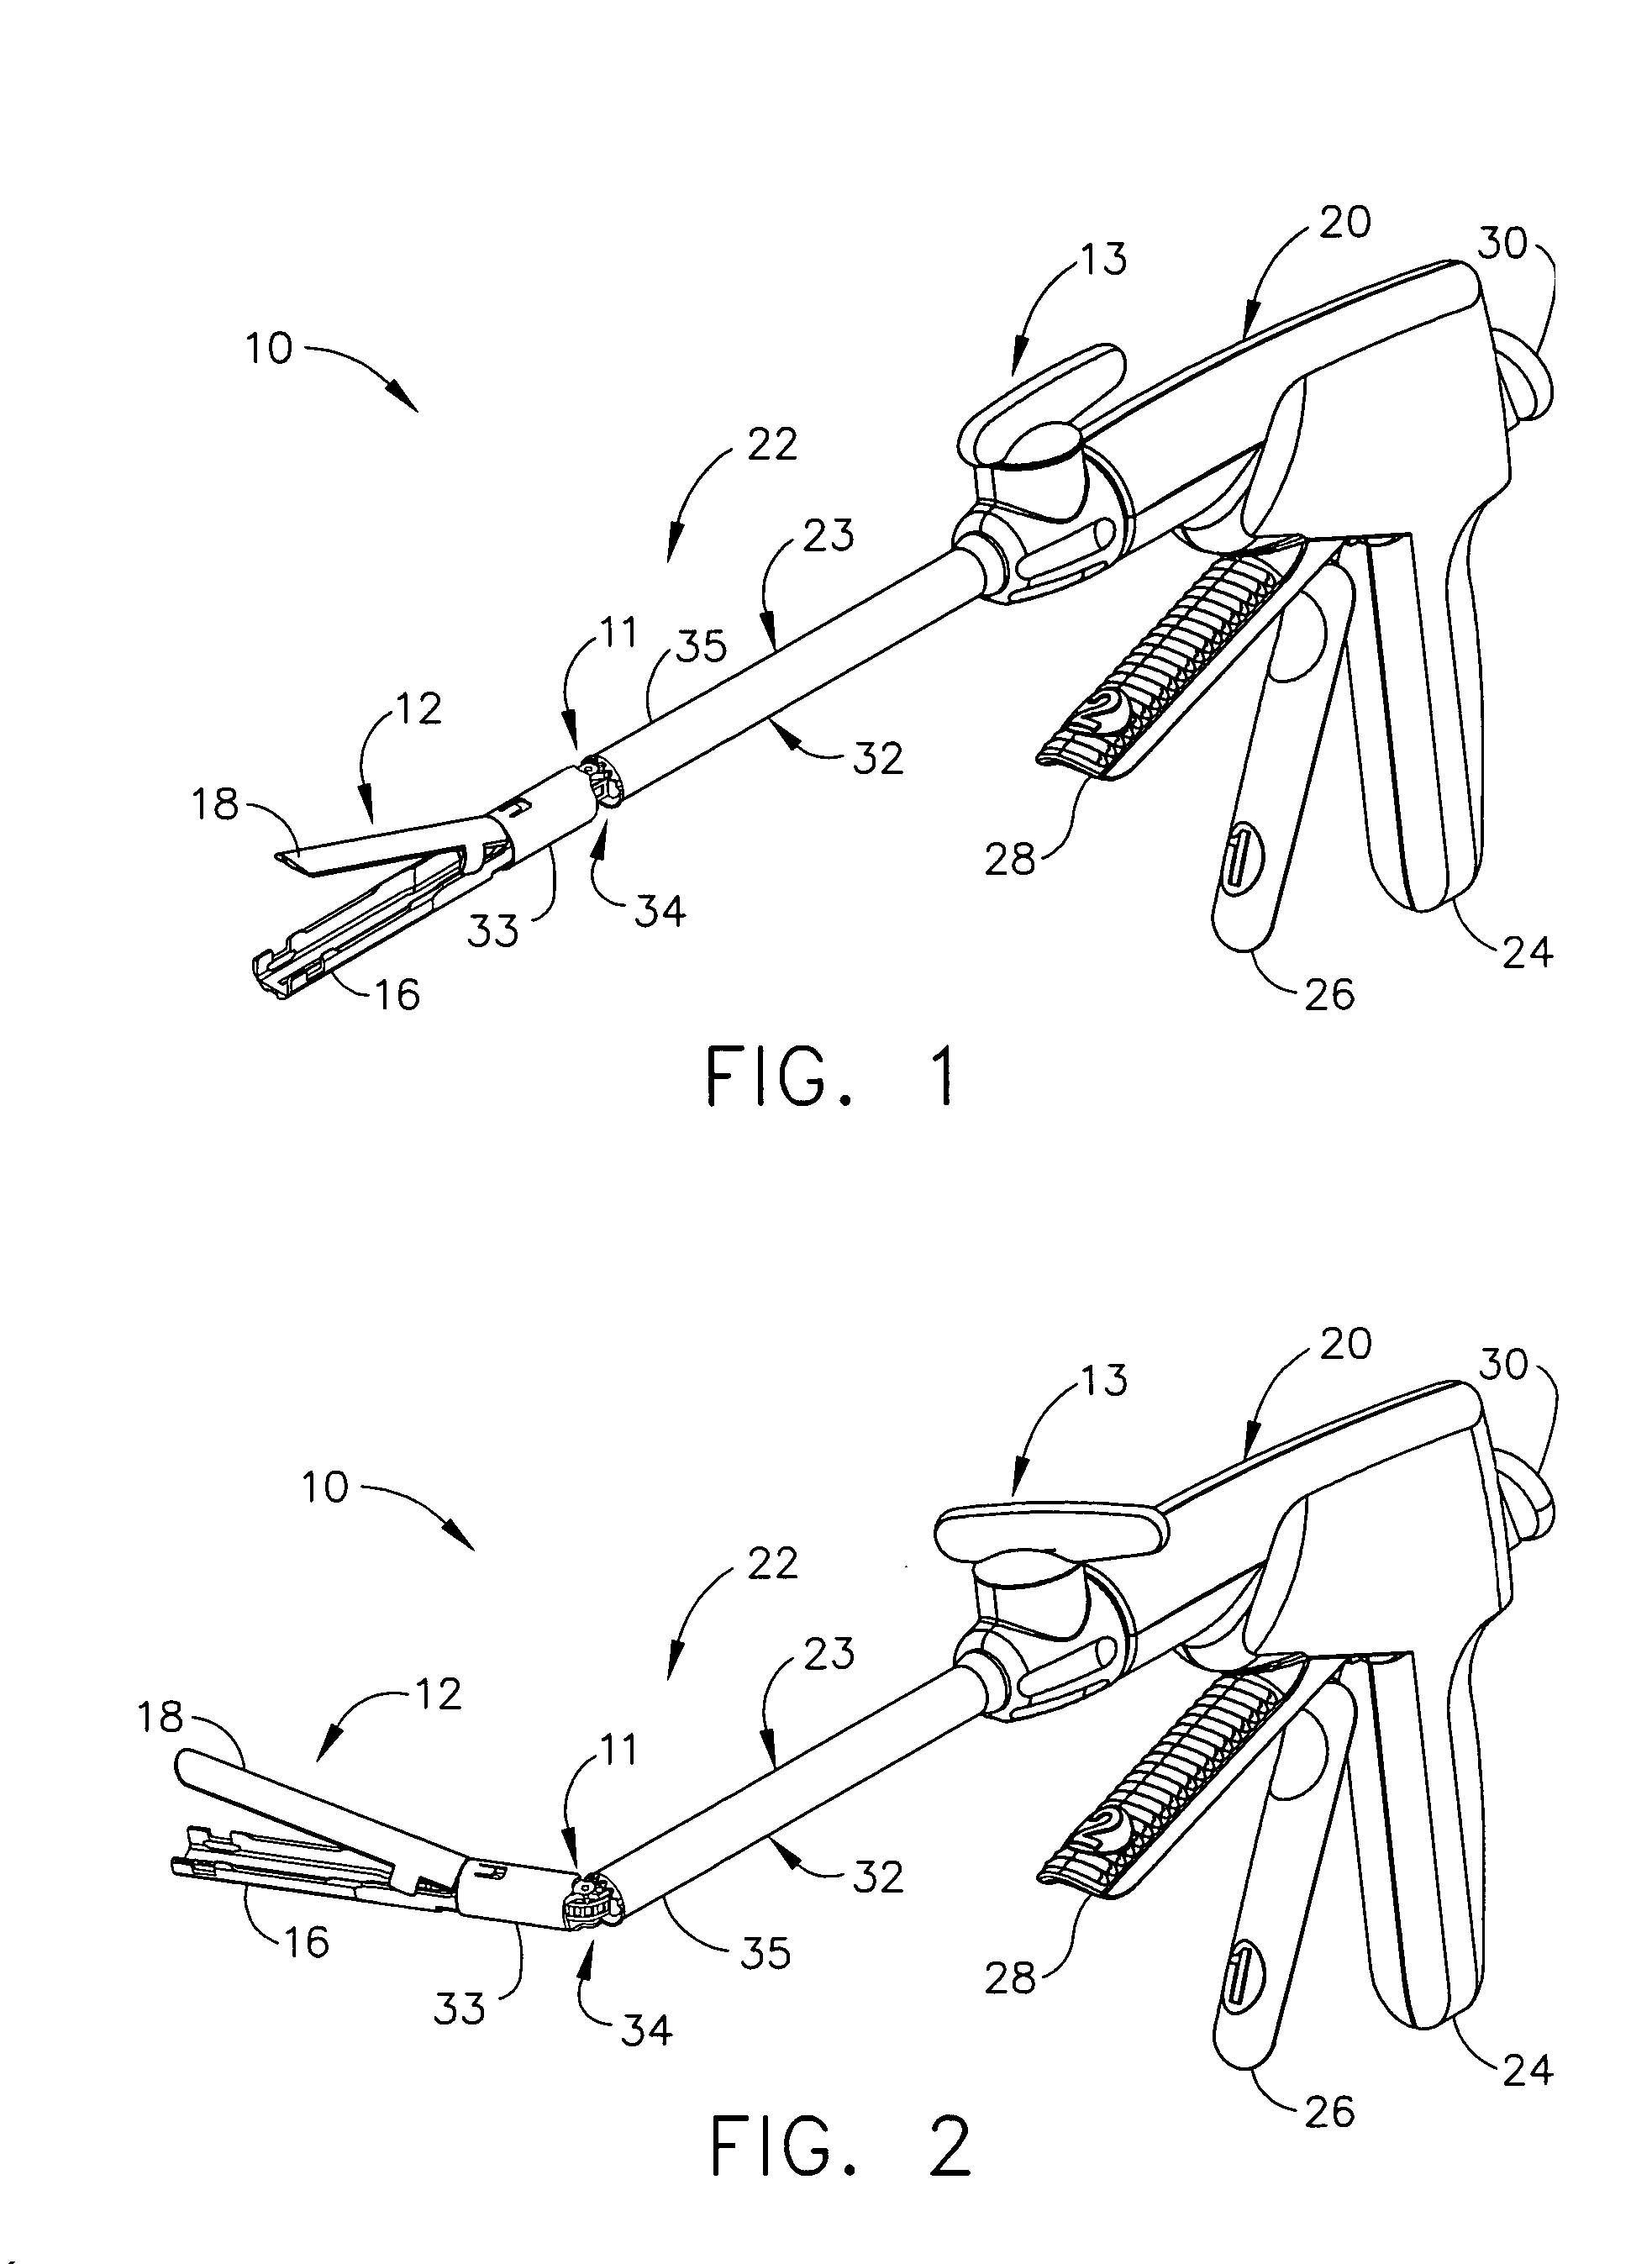 Surgical instrument incorporating an articulation mechanism having rotation about the longitudinal axis